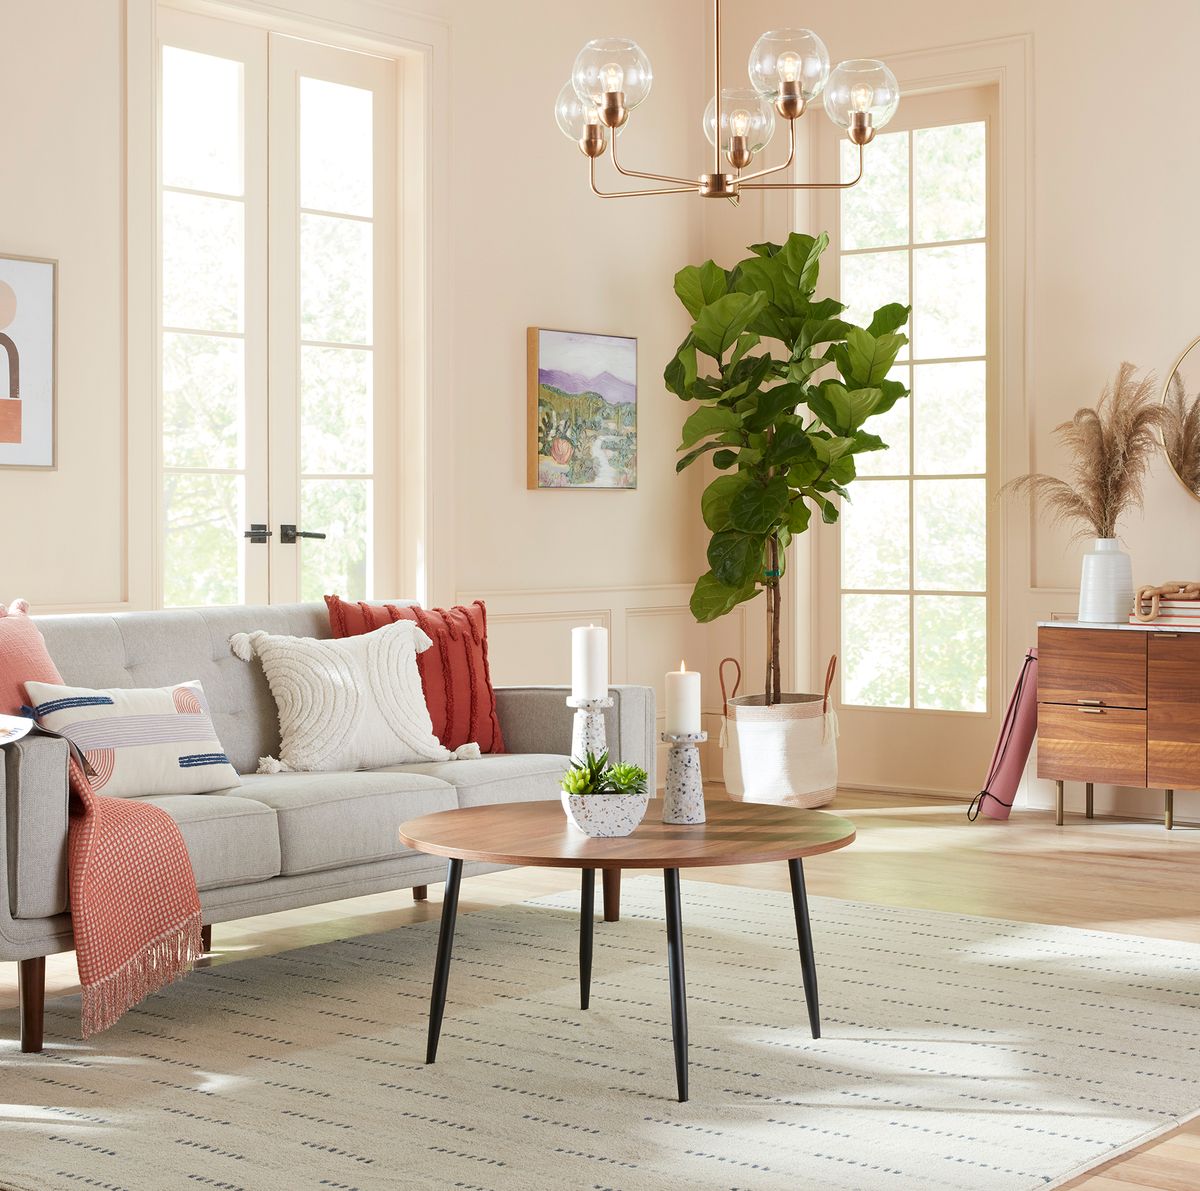 Lowe's New Origin21 Home Decor Brand Offers Modern Pieces at